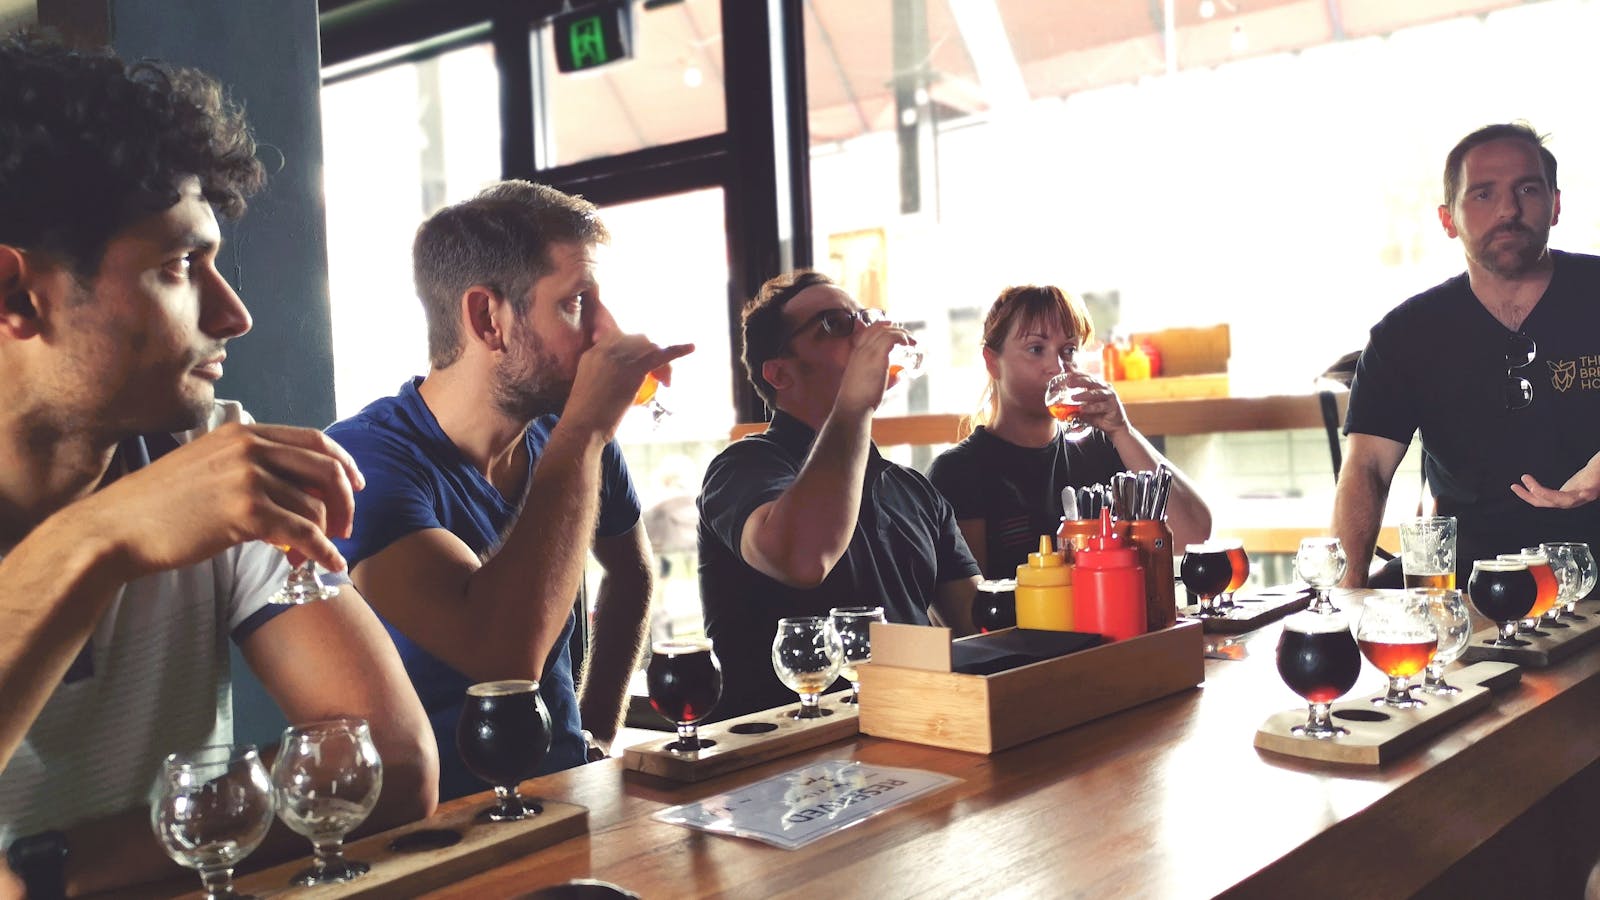 Taking part in our tour is a good way to try some fantastic beer and get some inside info on Hobart.